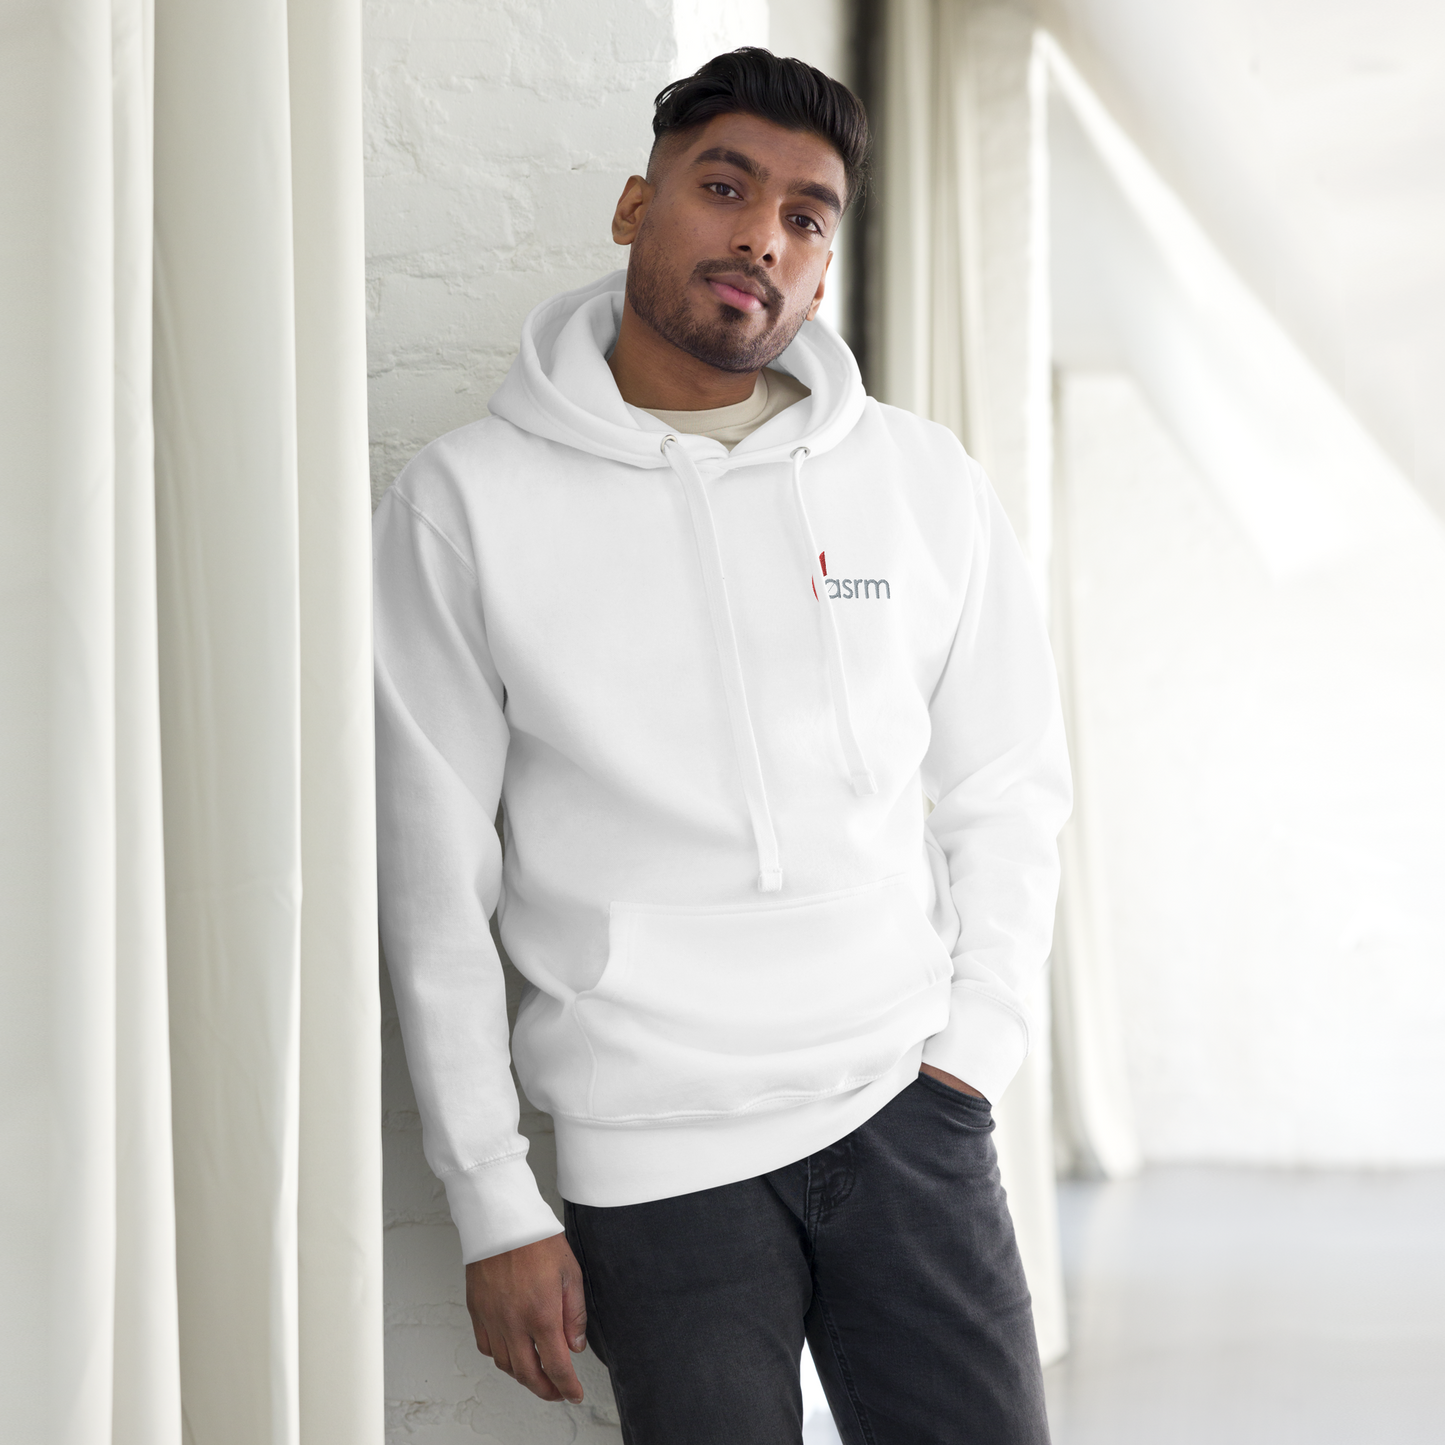 Thick ASRM Logo Embroidered Hoodie, Modeled on Man